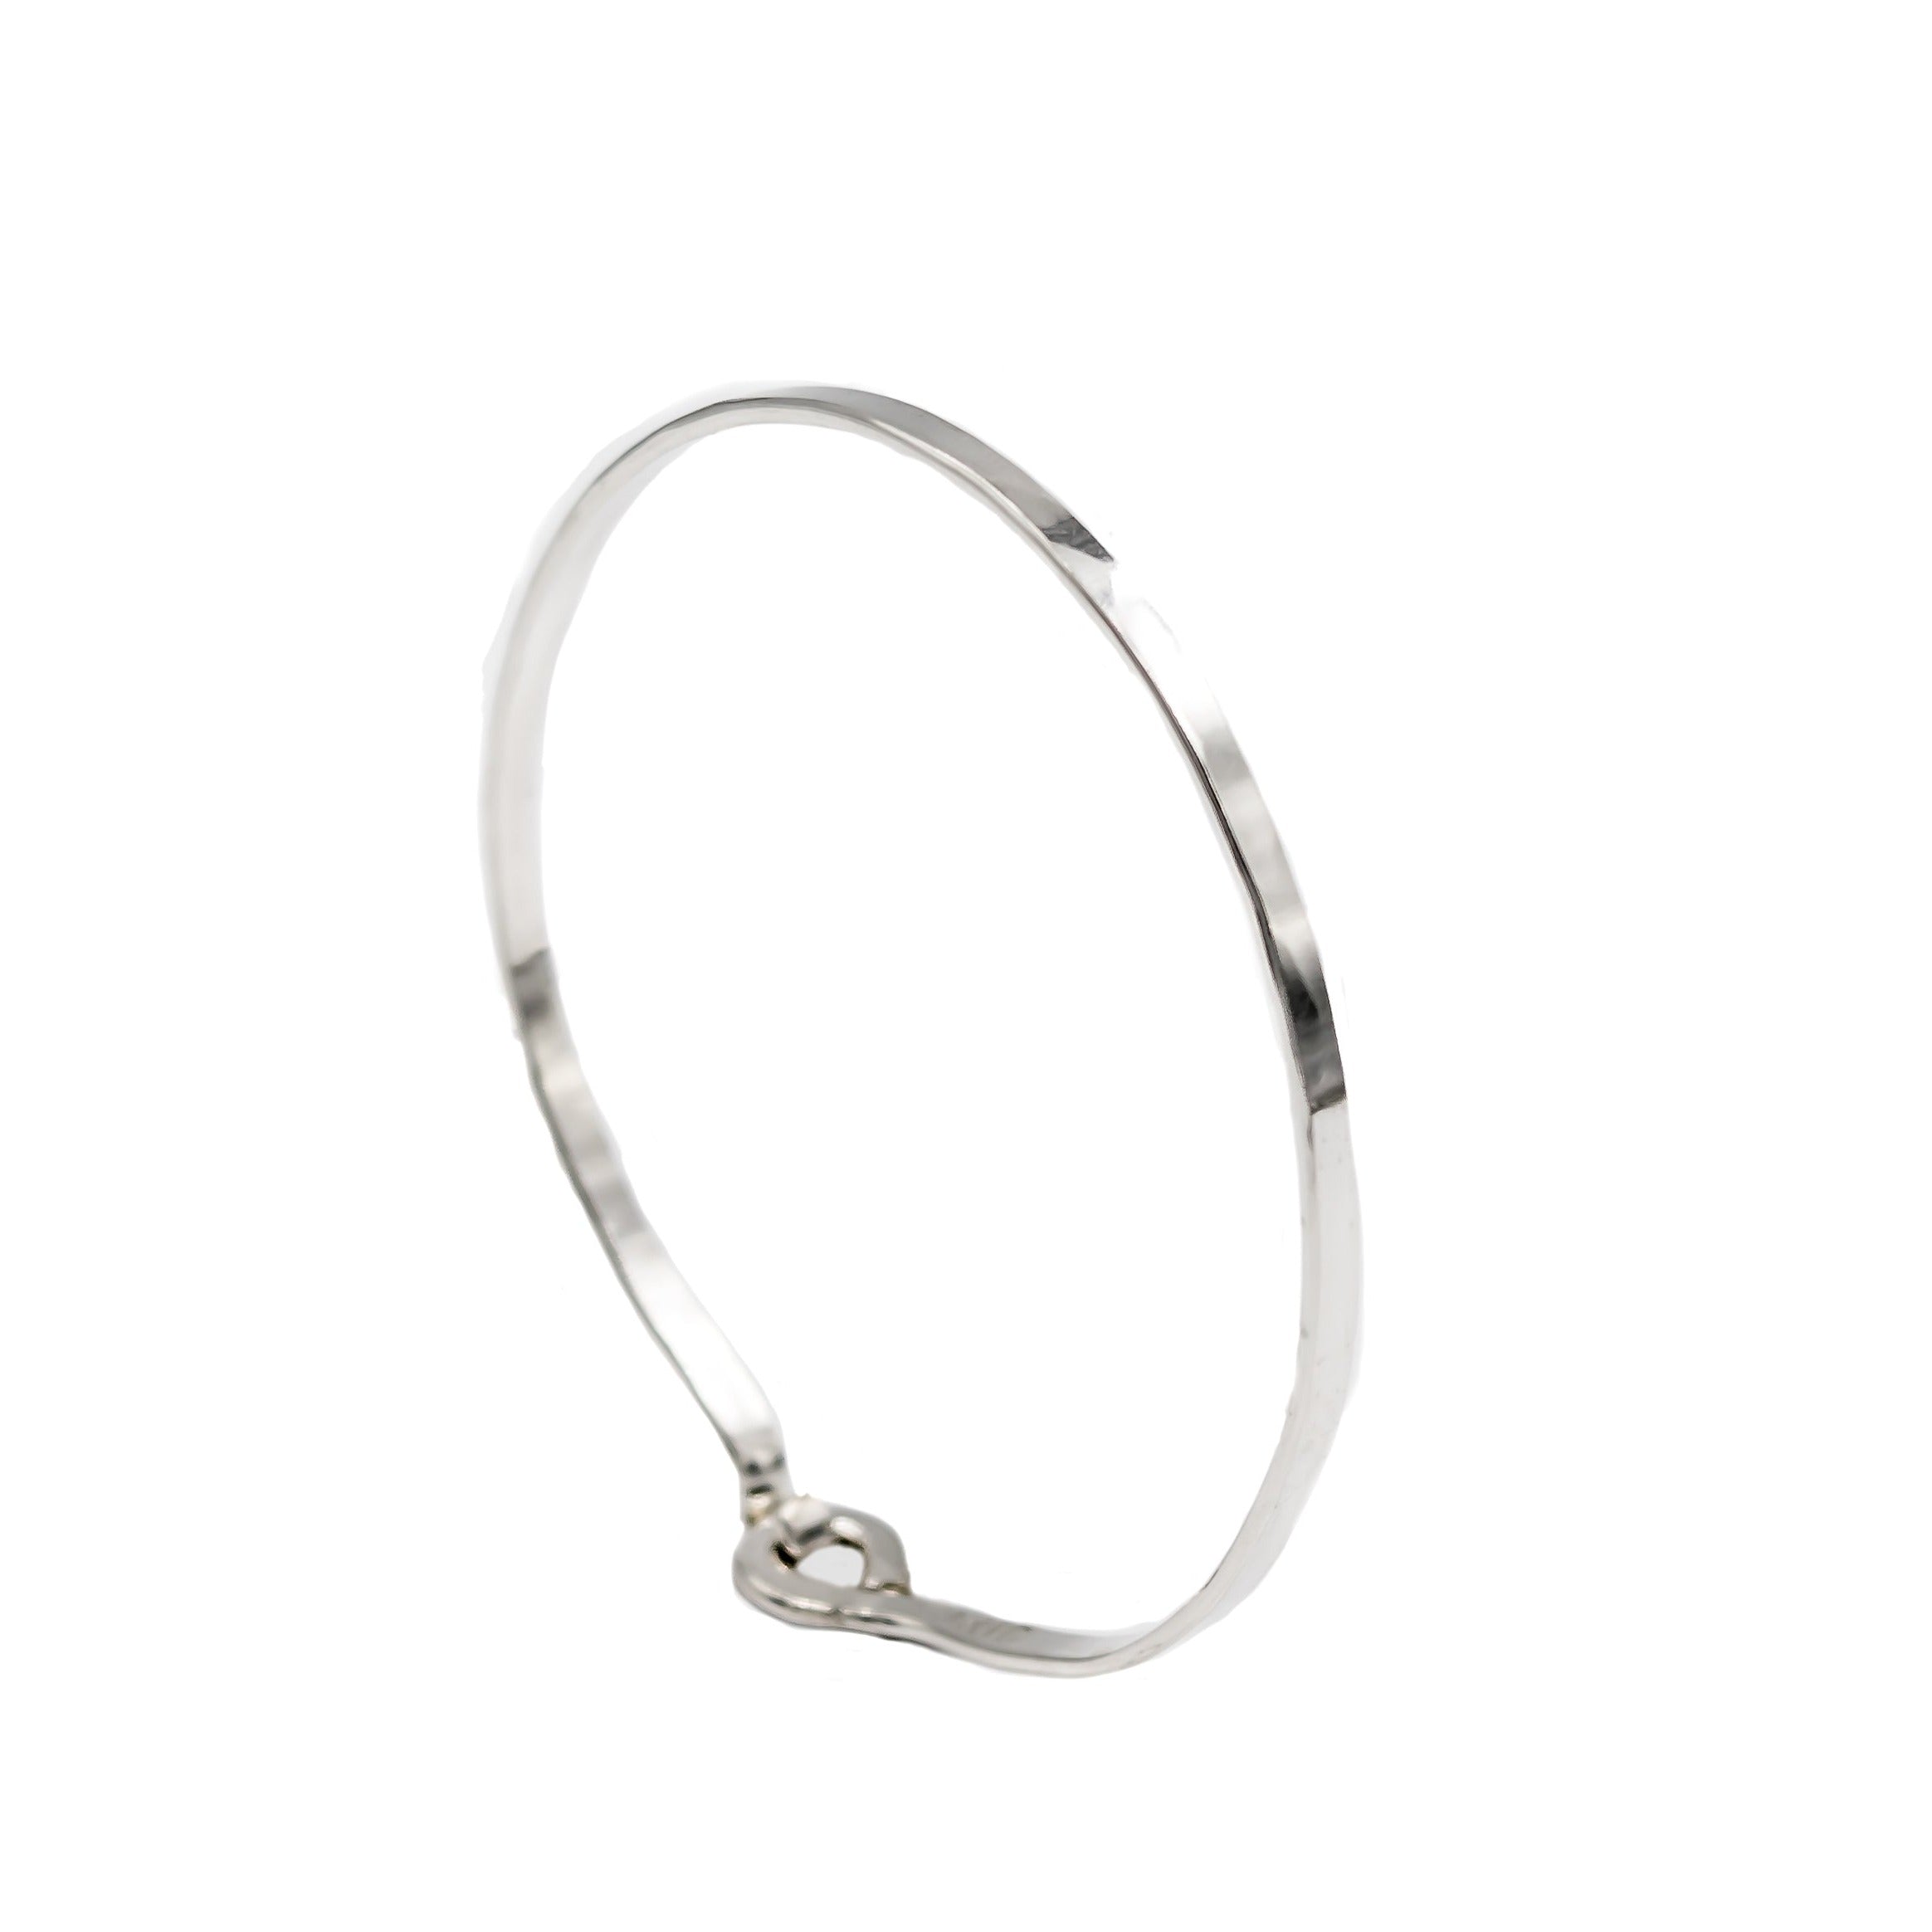 The Heavy Weight Open Bangle Bracelet - Smooth